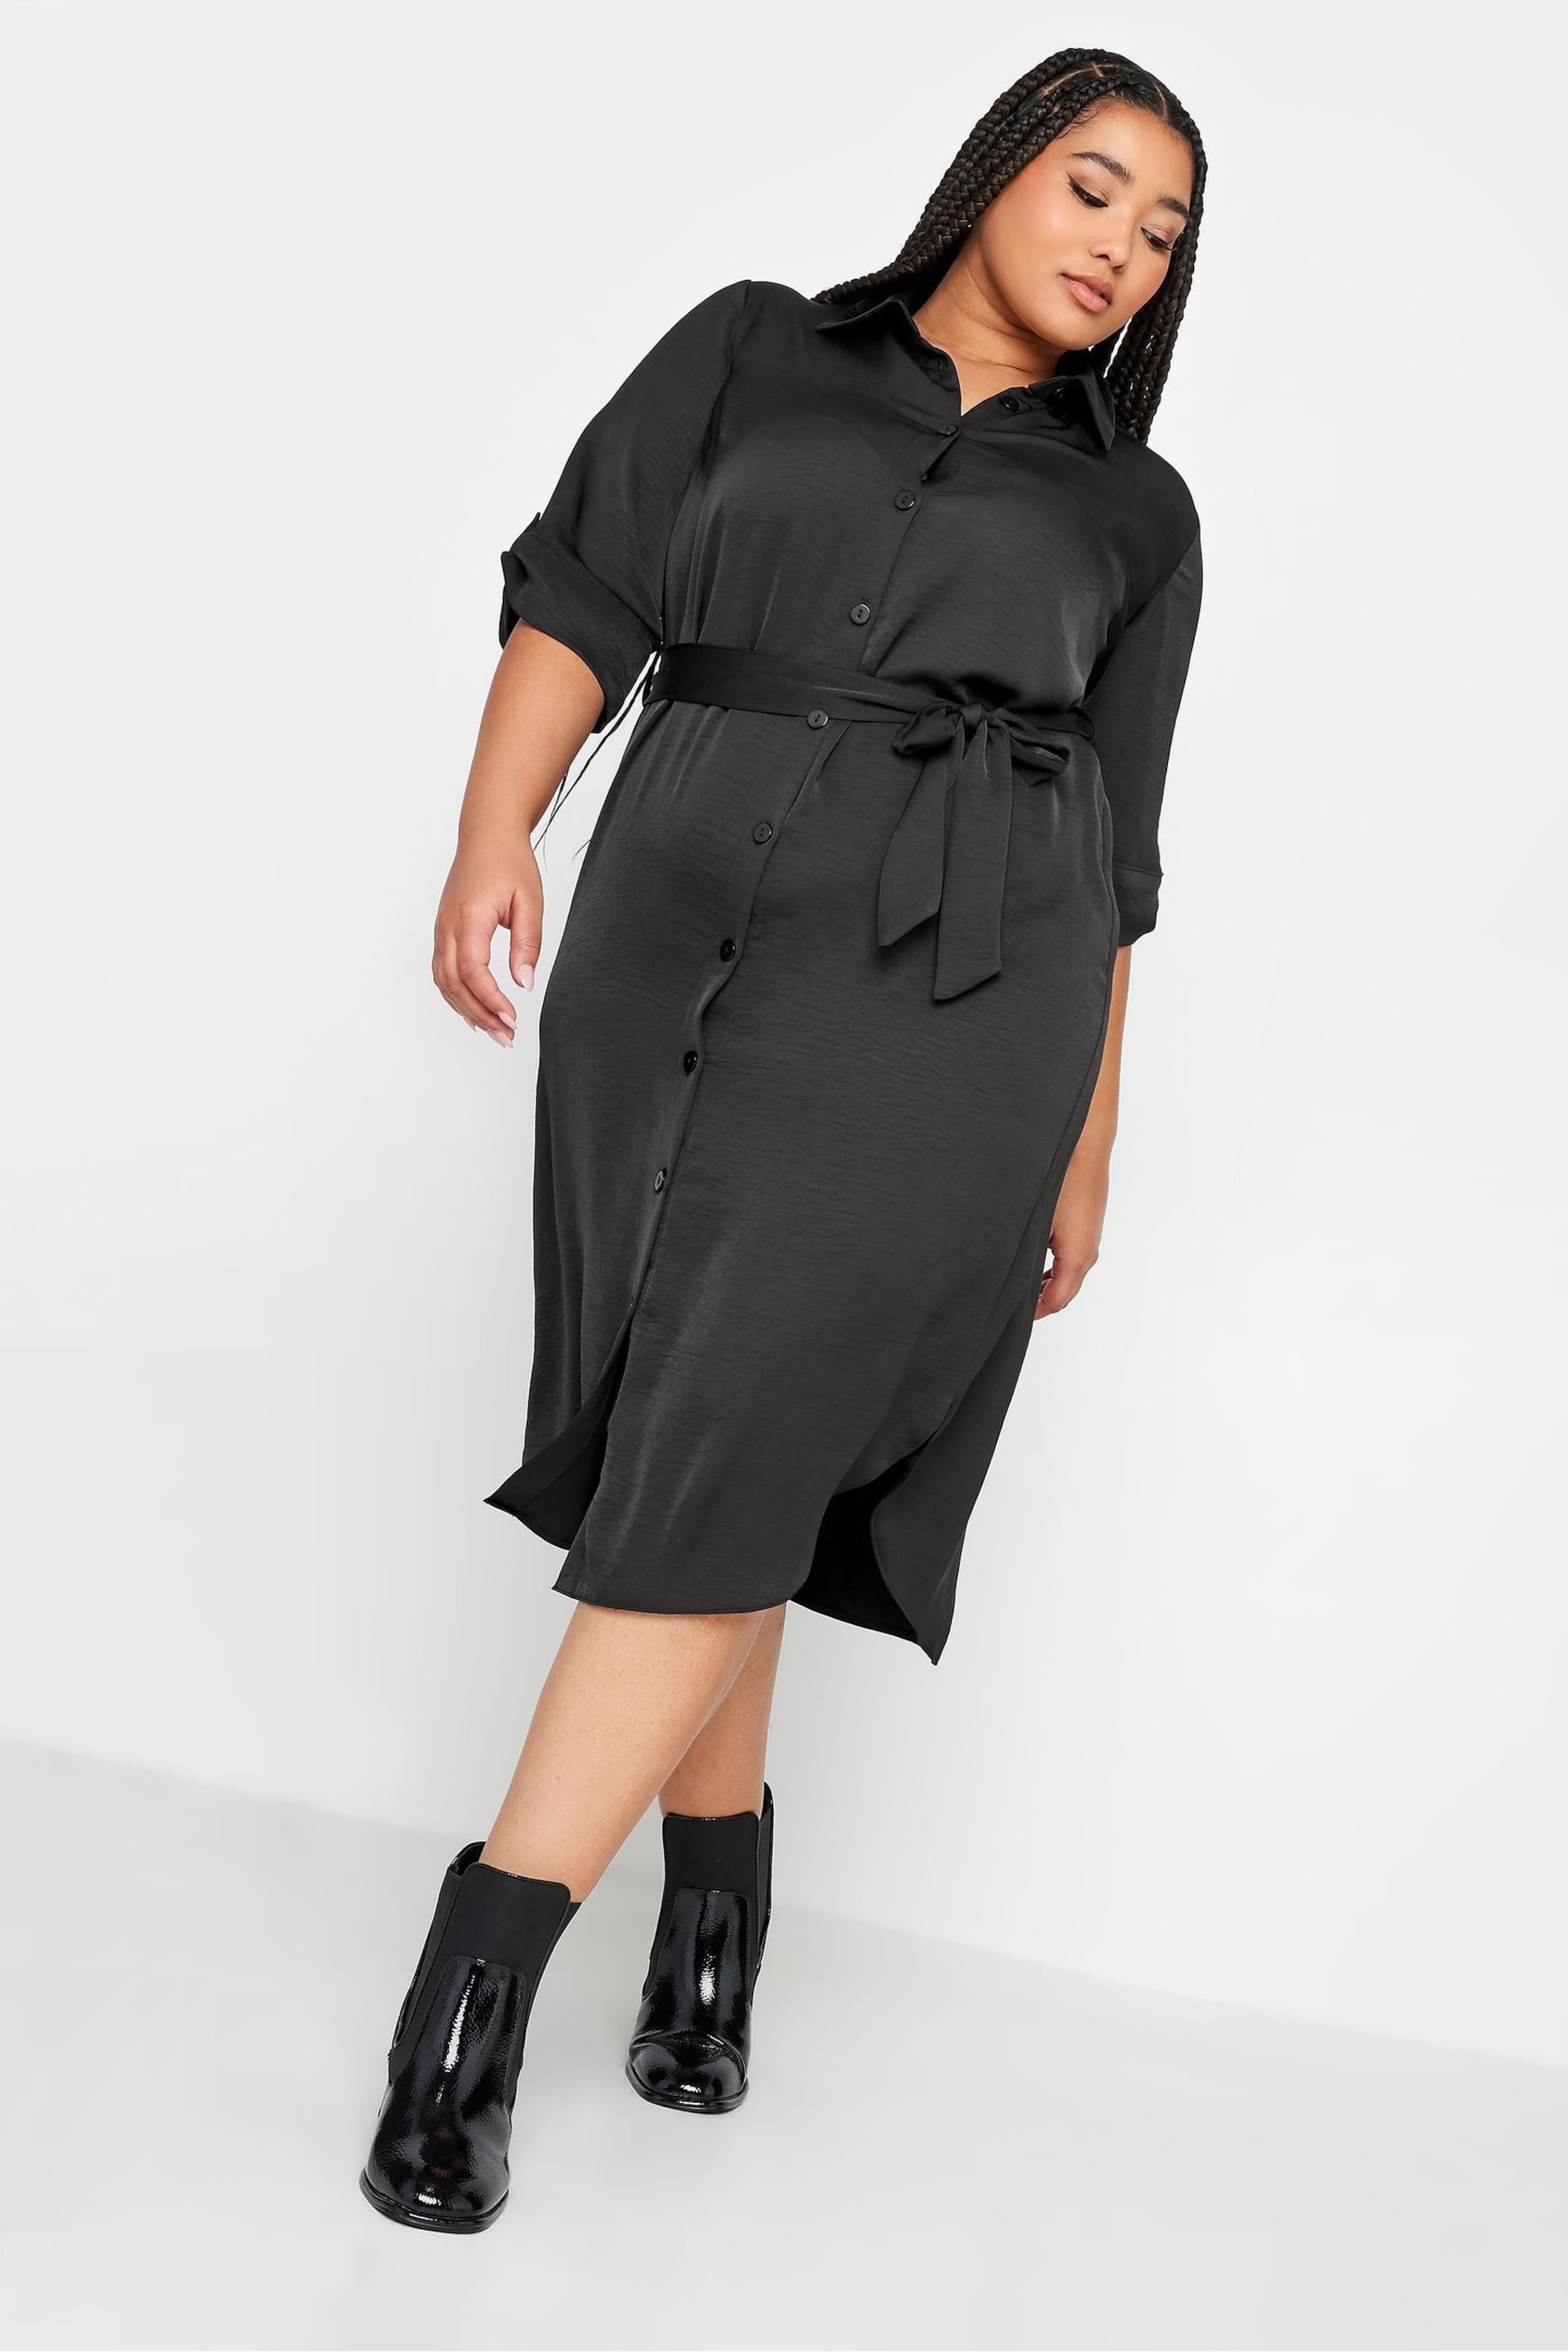 Yours Curve Black Tab 3/4 Sleeve Dress - Image 3 of 4